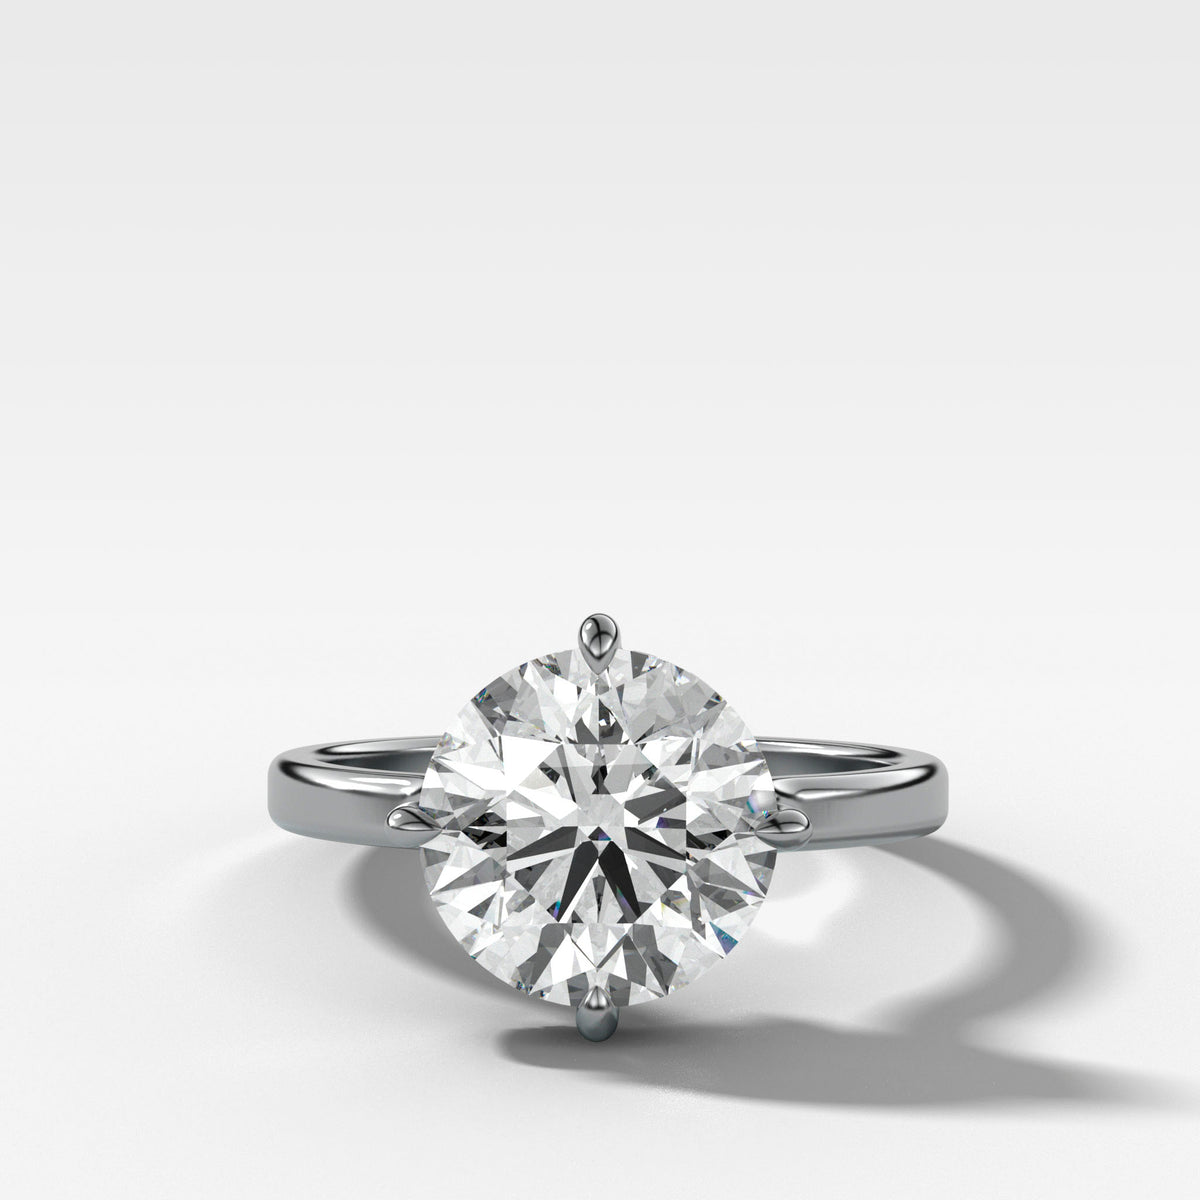 Compass Solitaire Engagement Ring with Round Cut Diamond